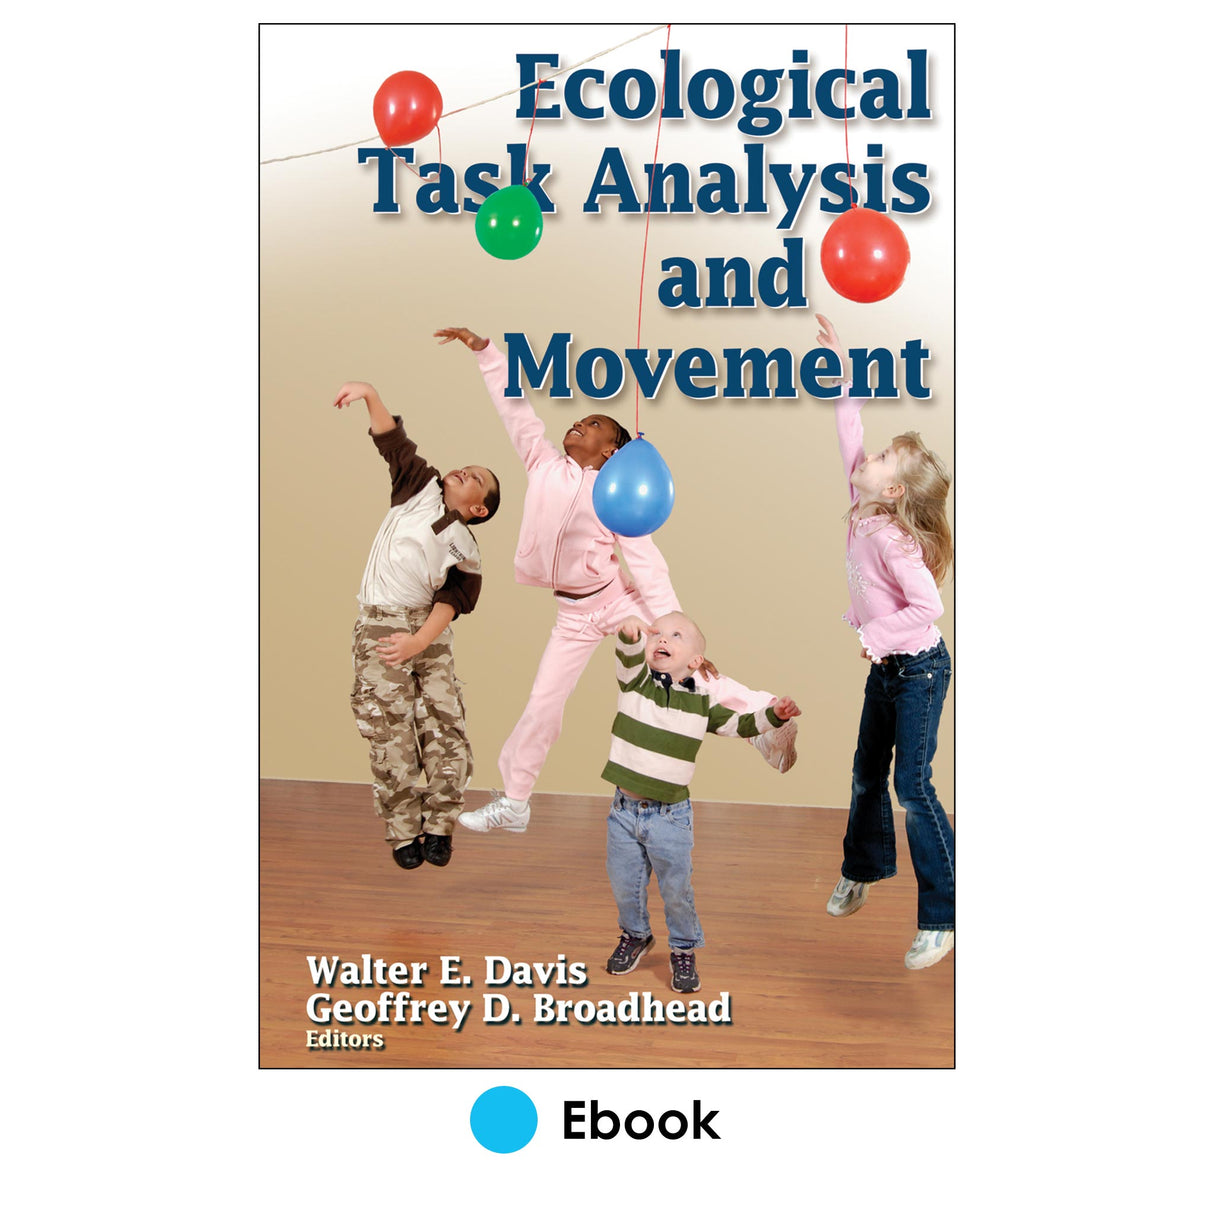 Ecological Task Analysis and Movement PDF